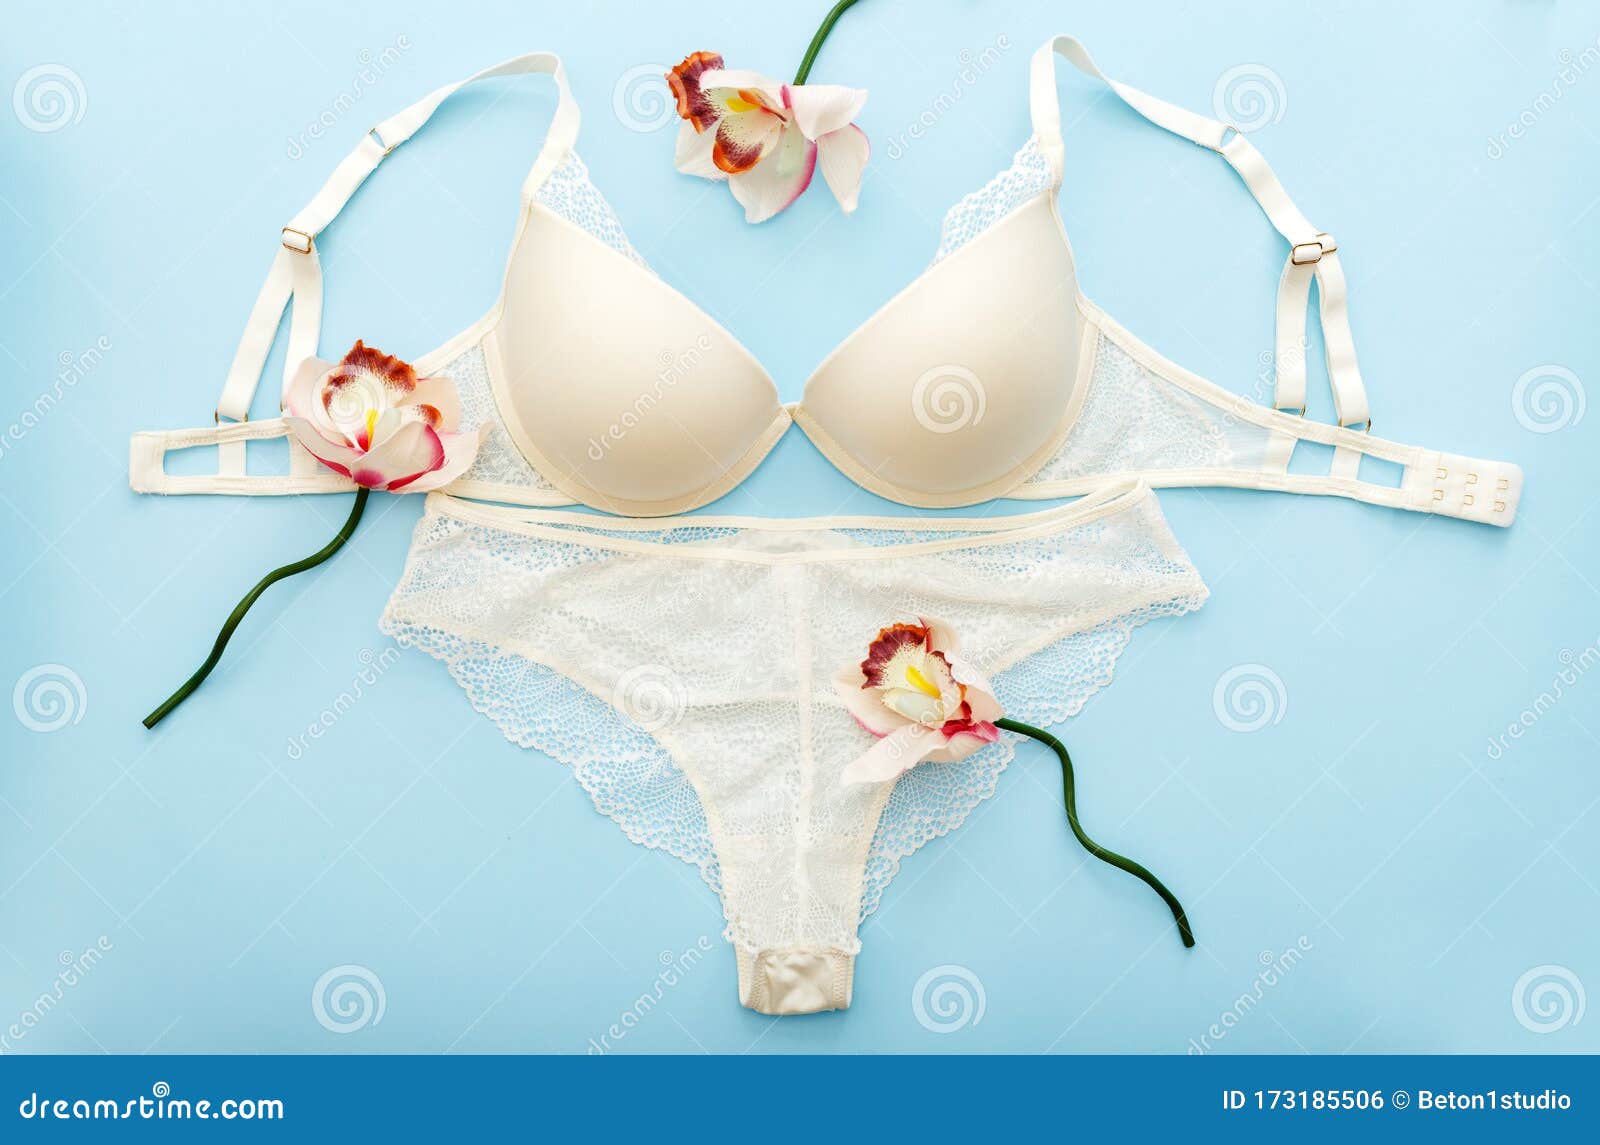 Bra and Pantie. White Lace Lingerie on Blue Background. Flat Lay